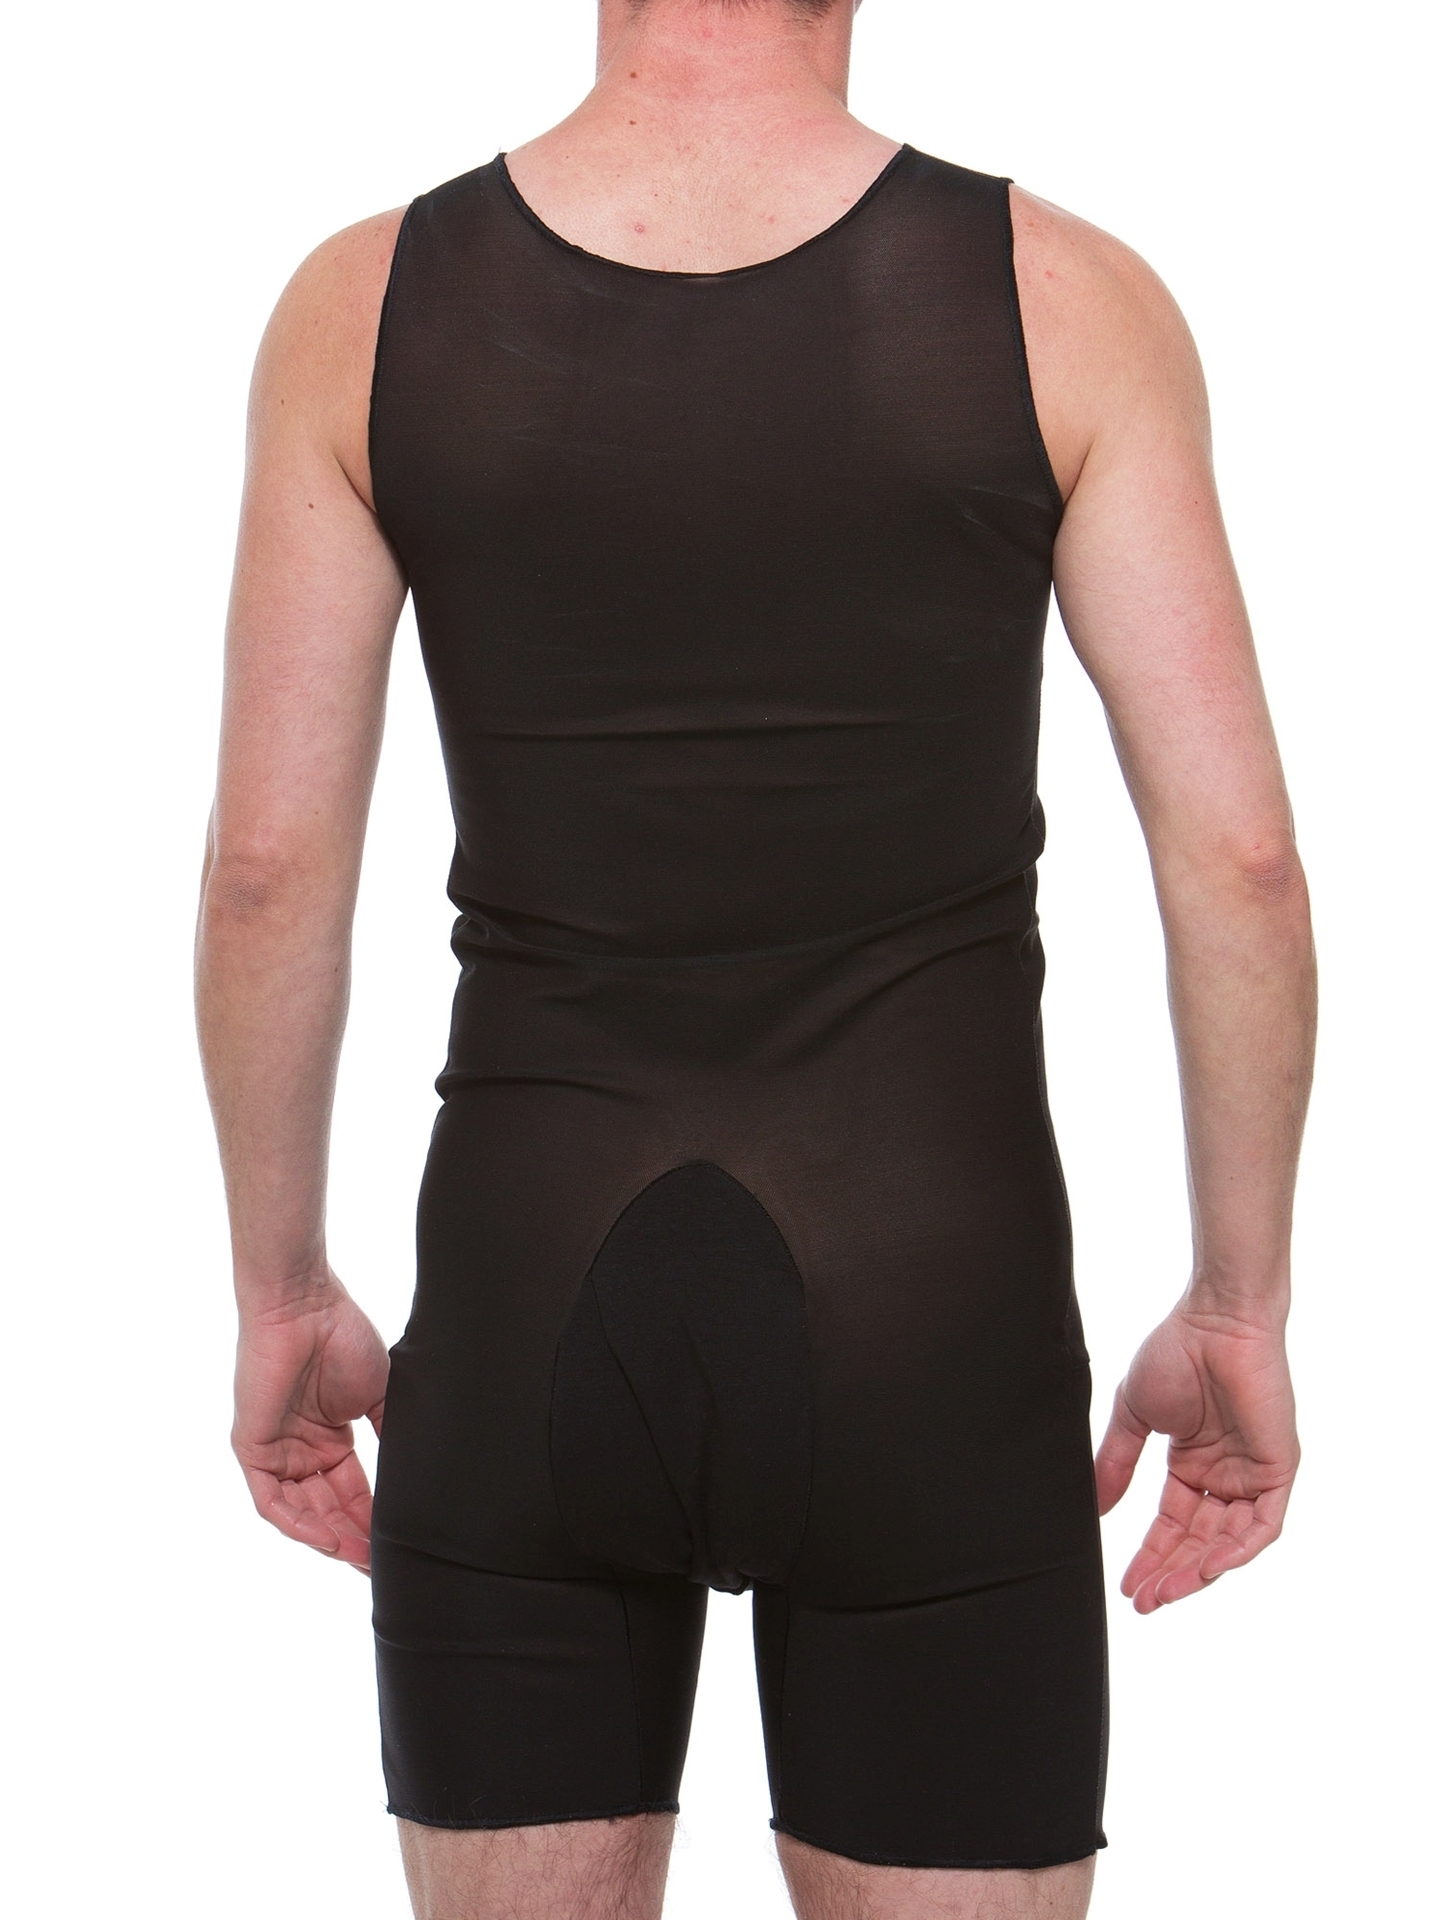 Ultimate Chest Binder Tanksuit. FTM Chest Binders for Trans Men by